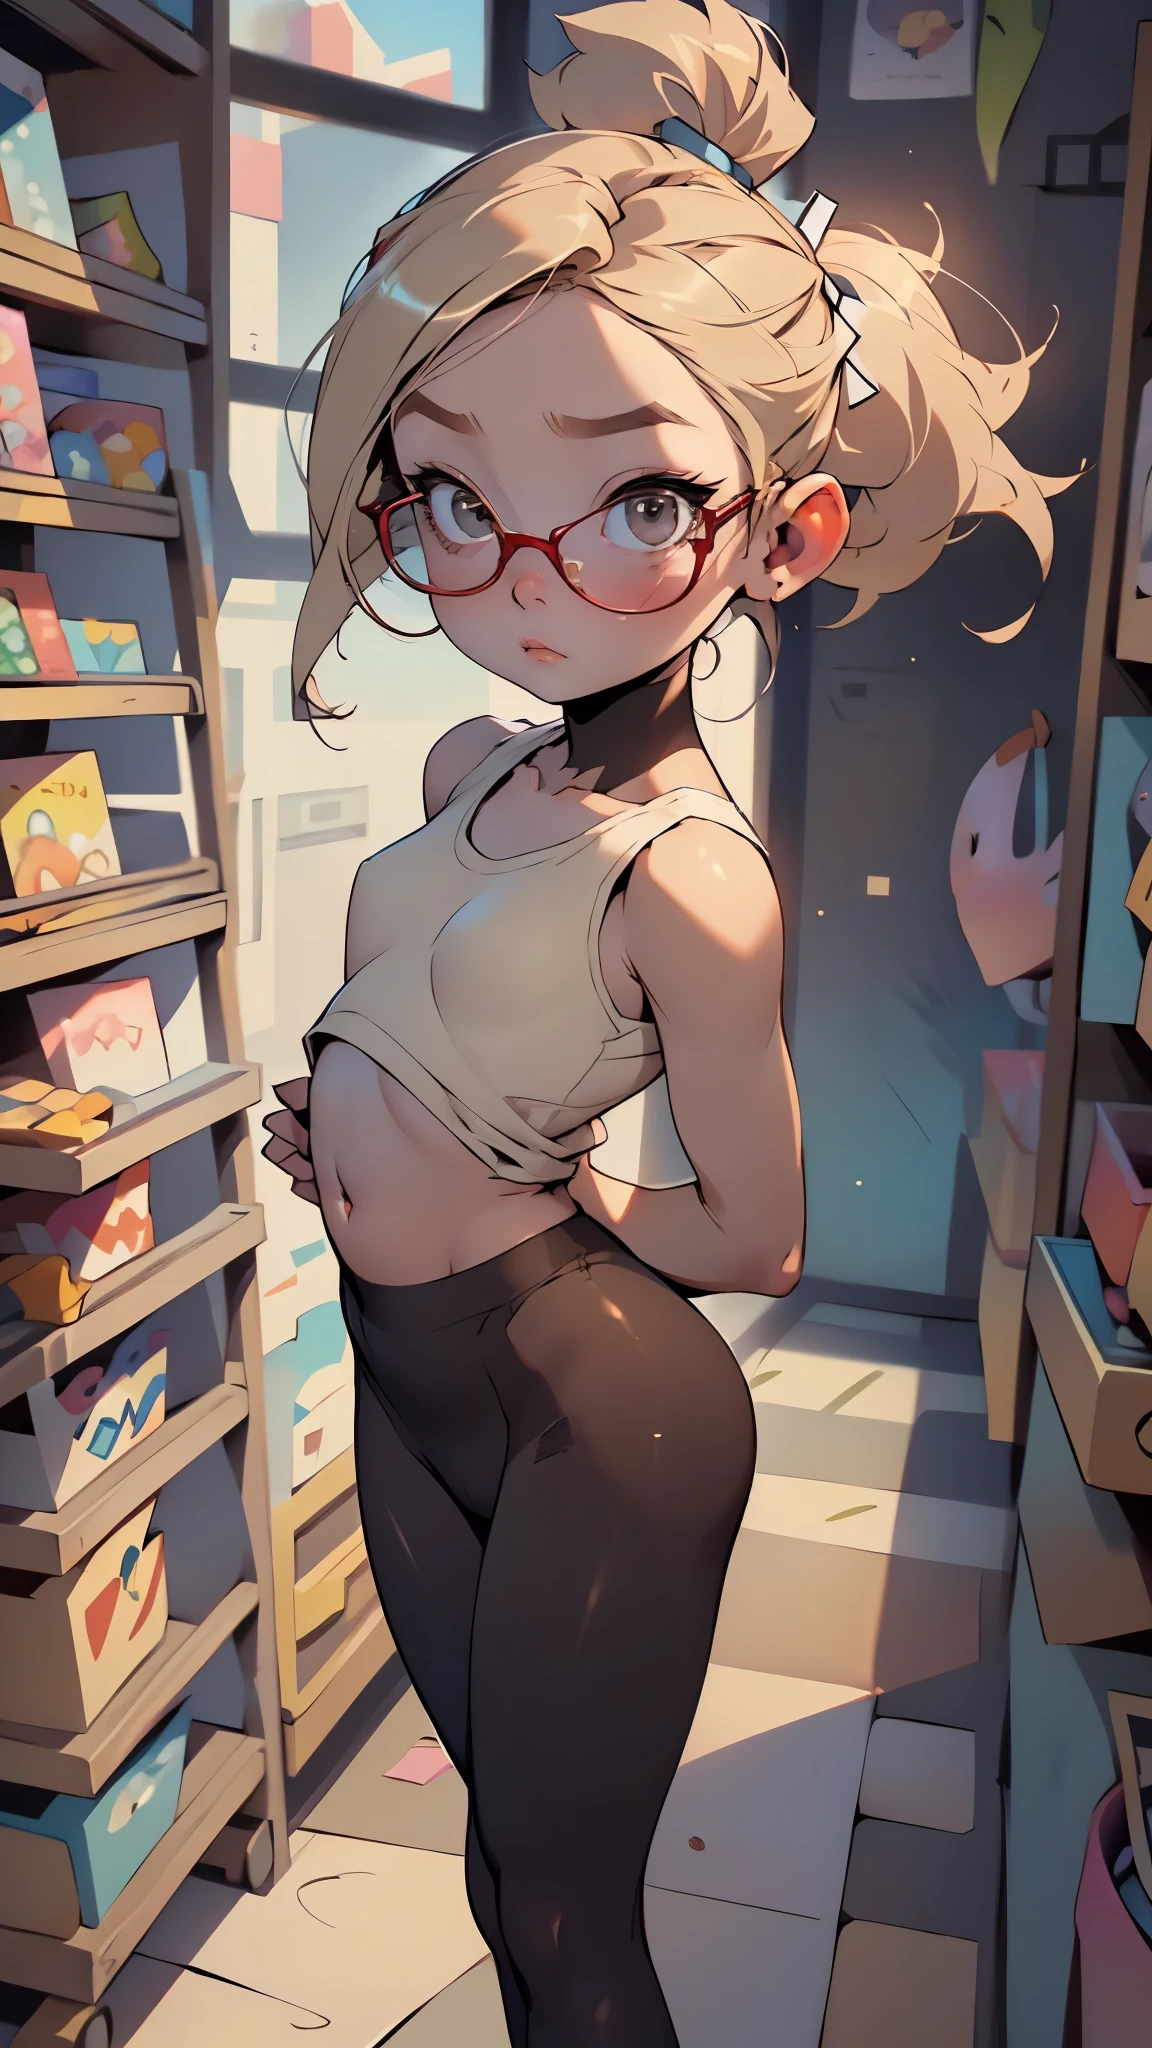 glow，masterpiece, beautiful, 4K, best quality, rave style， cute face, small breasts,  blonde，high ponytail，pointed ears，round frame glasses，wide hips， Pouting expression， pantyhose, bunny girl

(nsfw:0.55), ((flat chested, flat stomach, baby face)), (intense colors)